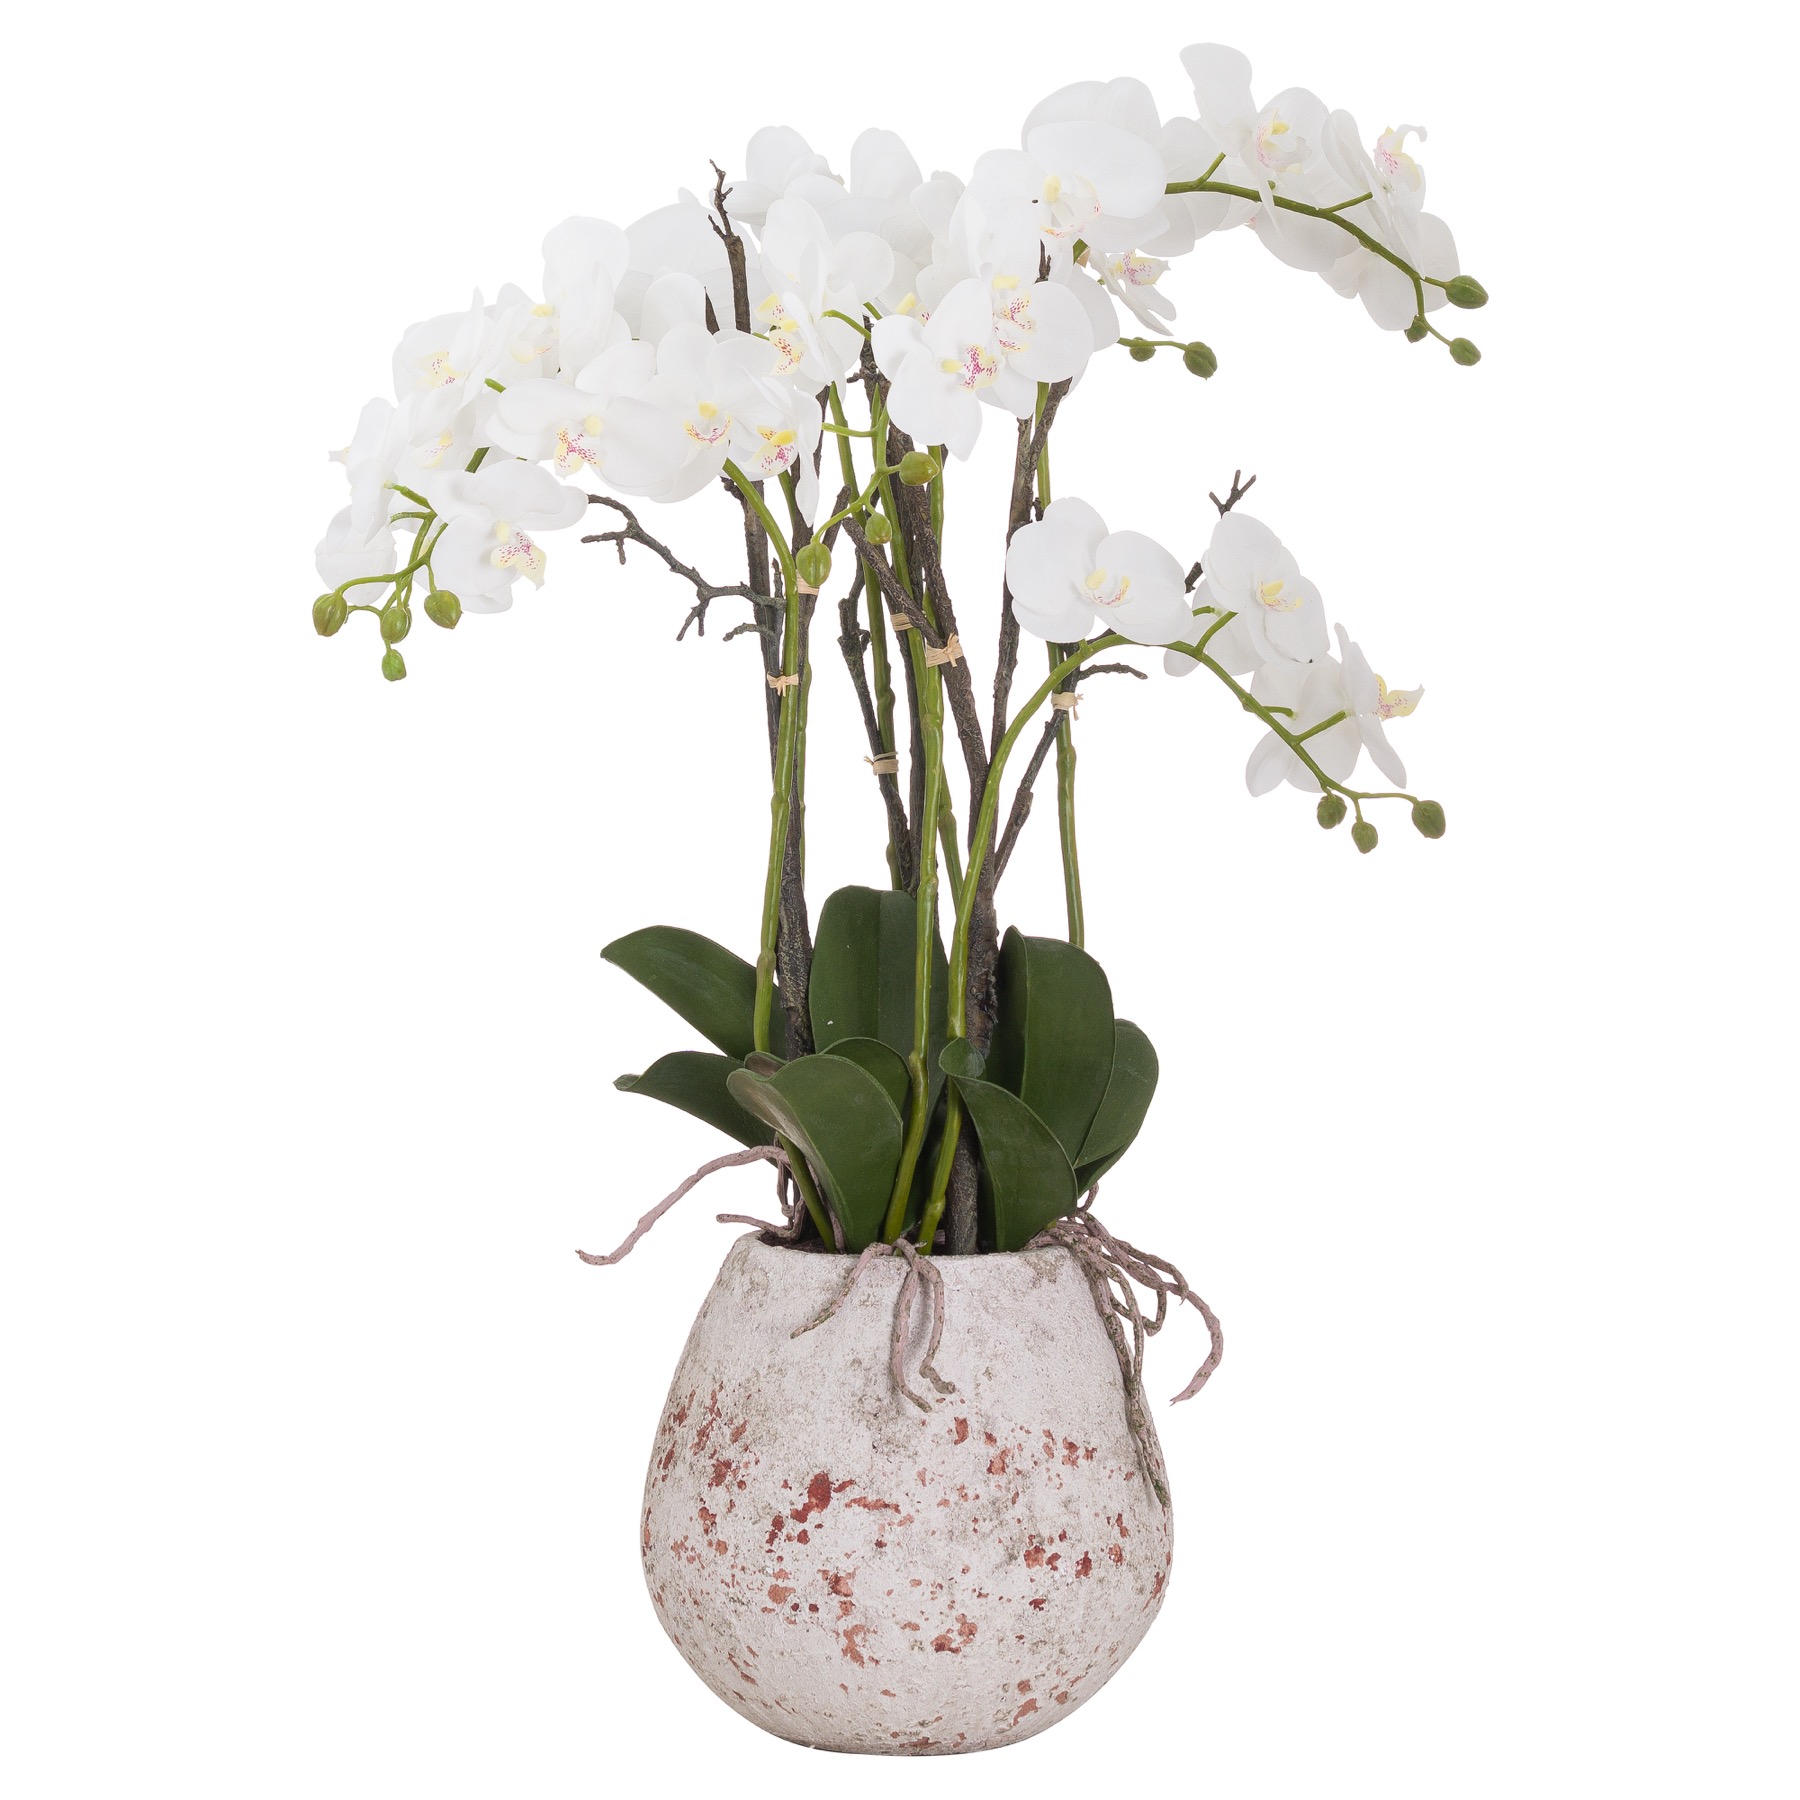 Large Stone Potted Orchid With Roots - Image 1